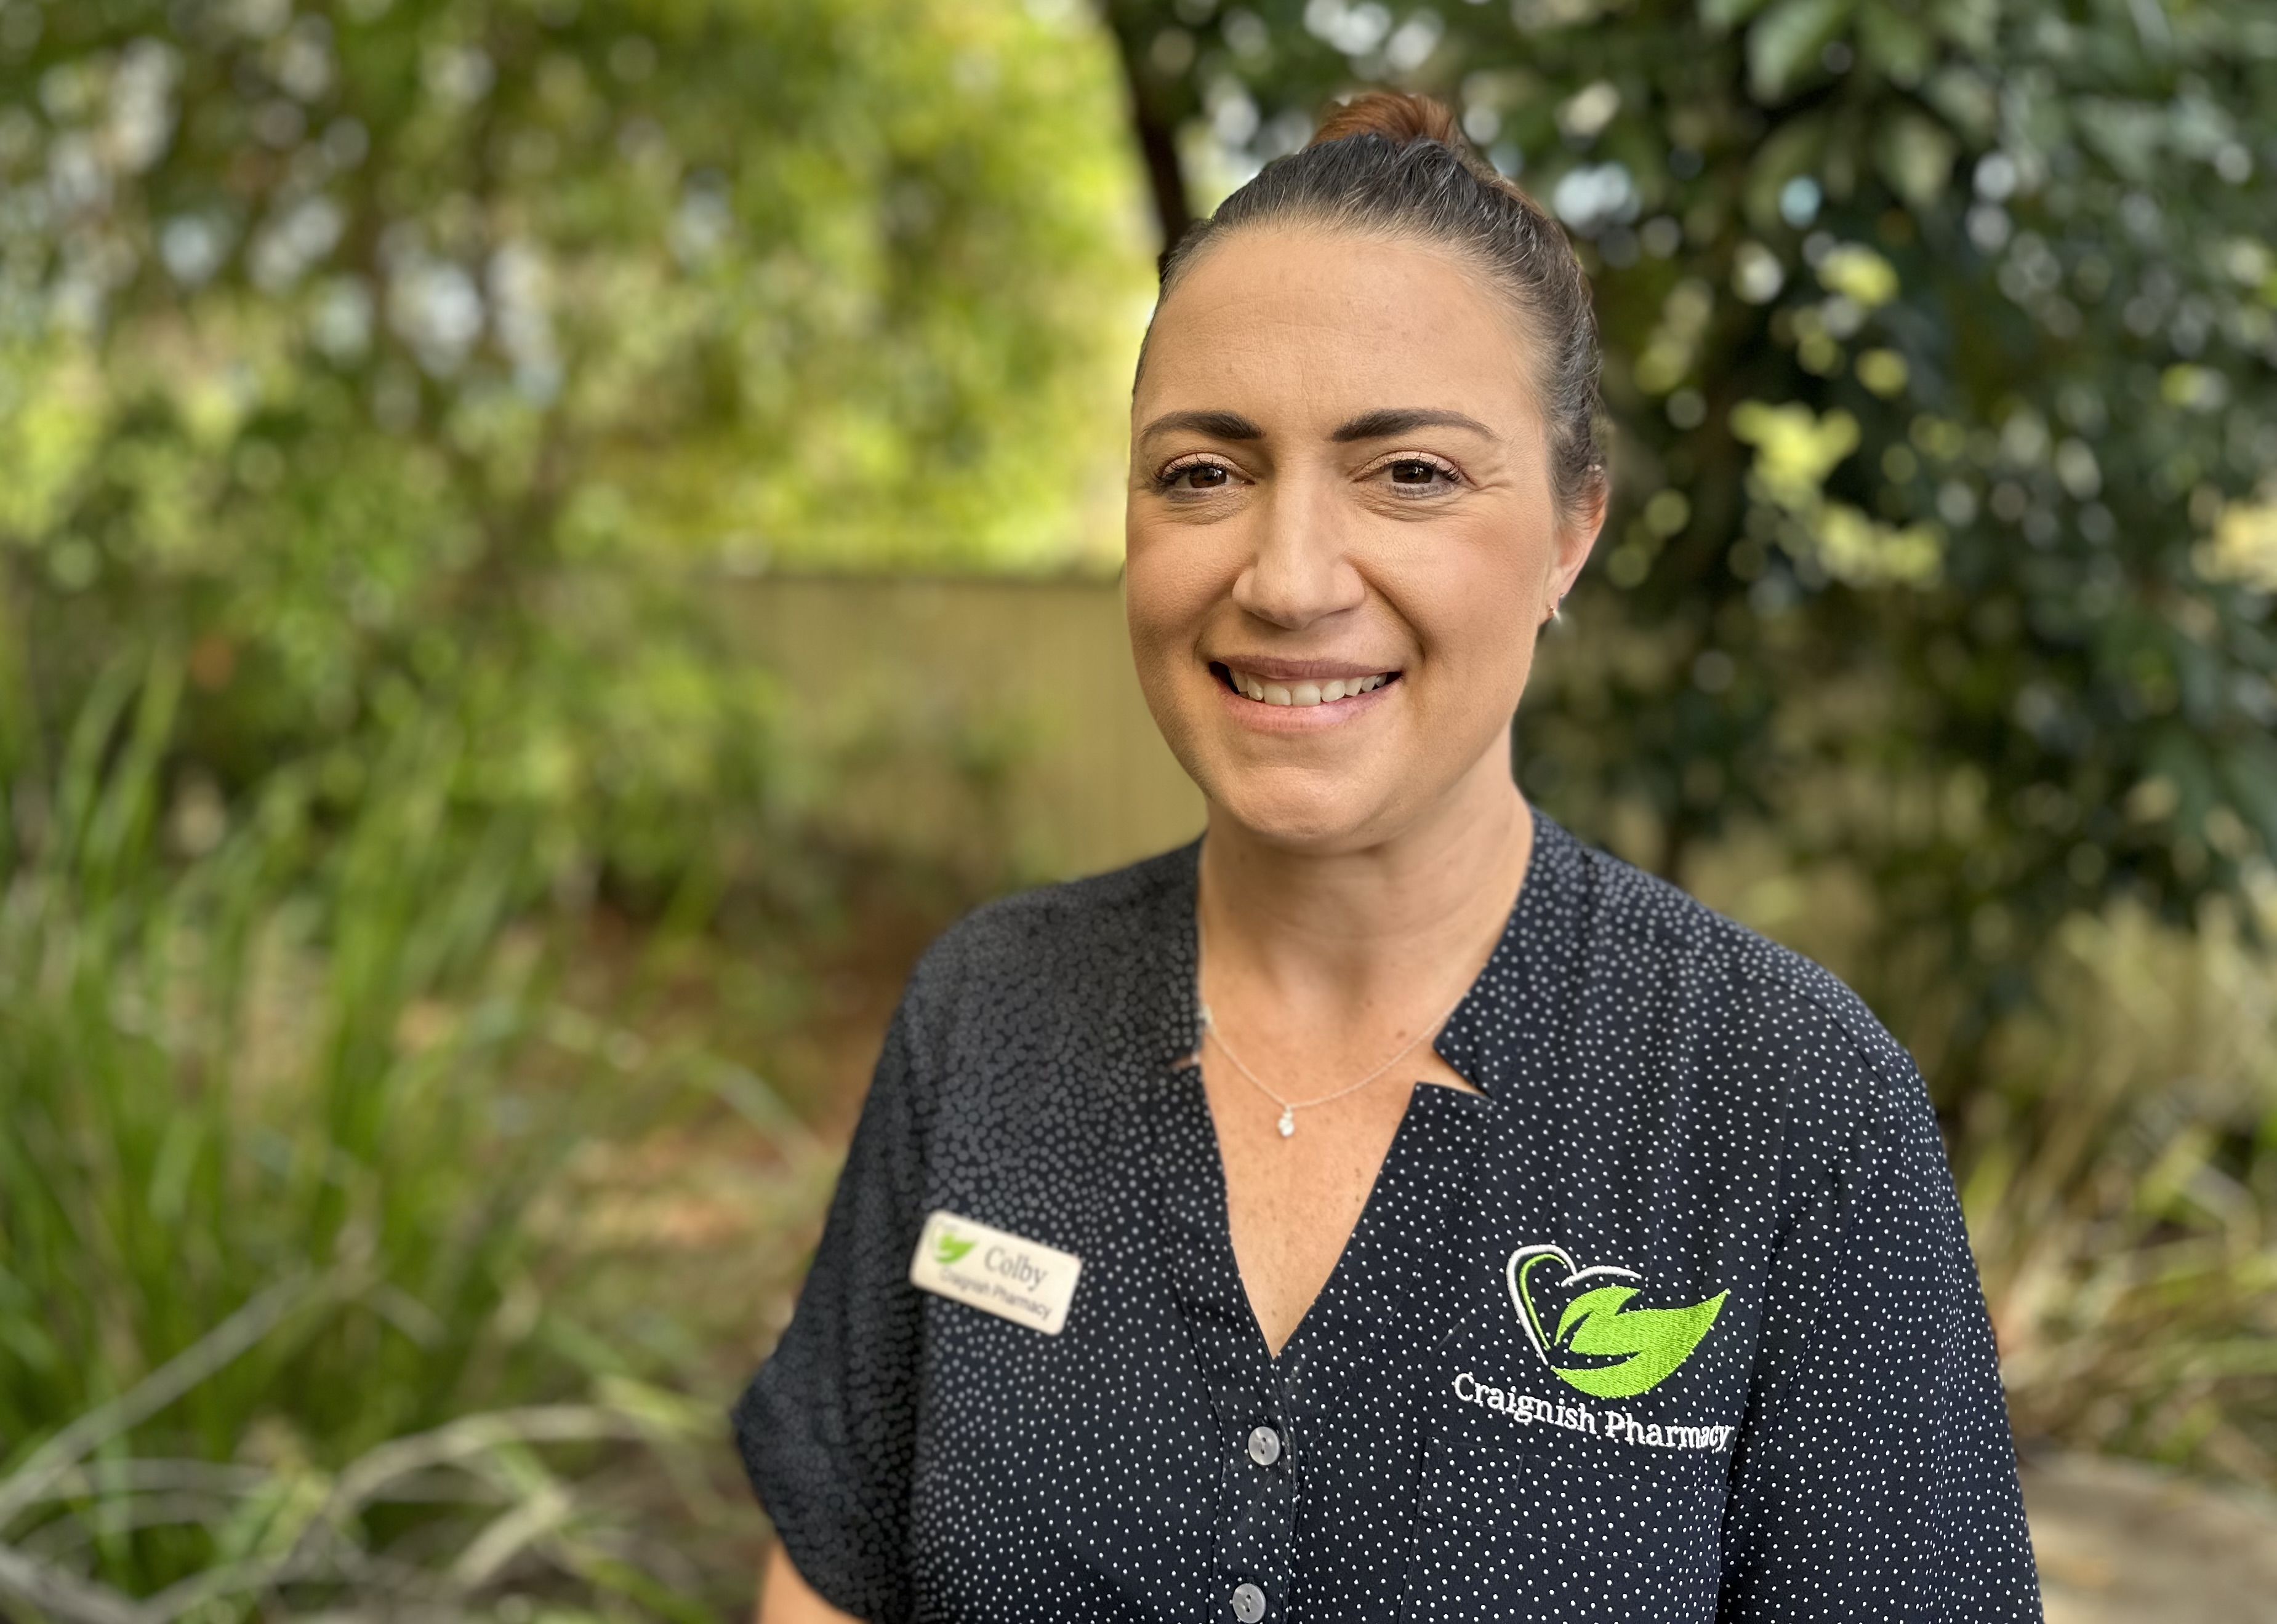 Hervey Bay pharmacy assistant to represent Queensland in national award